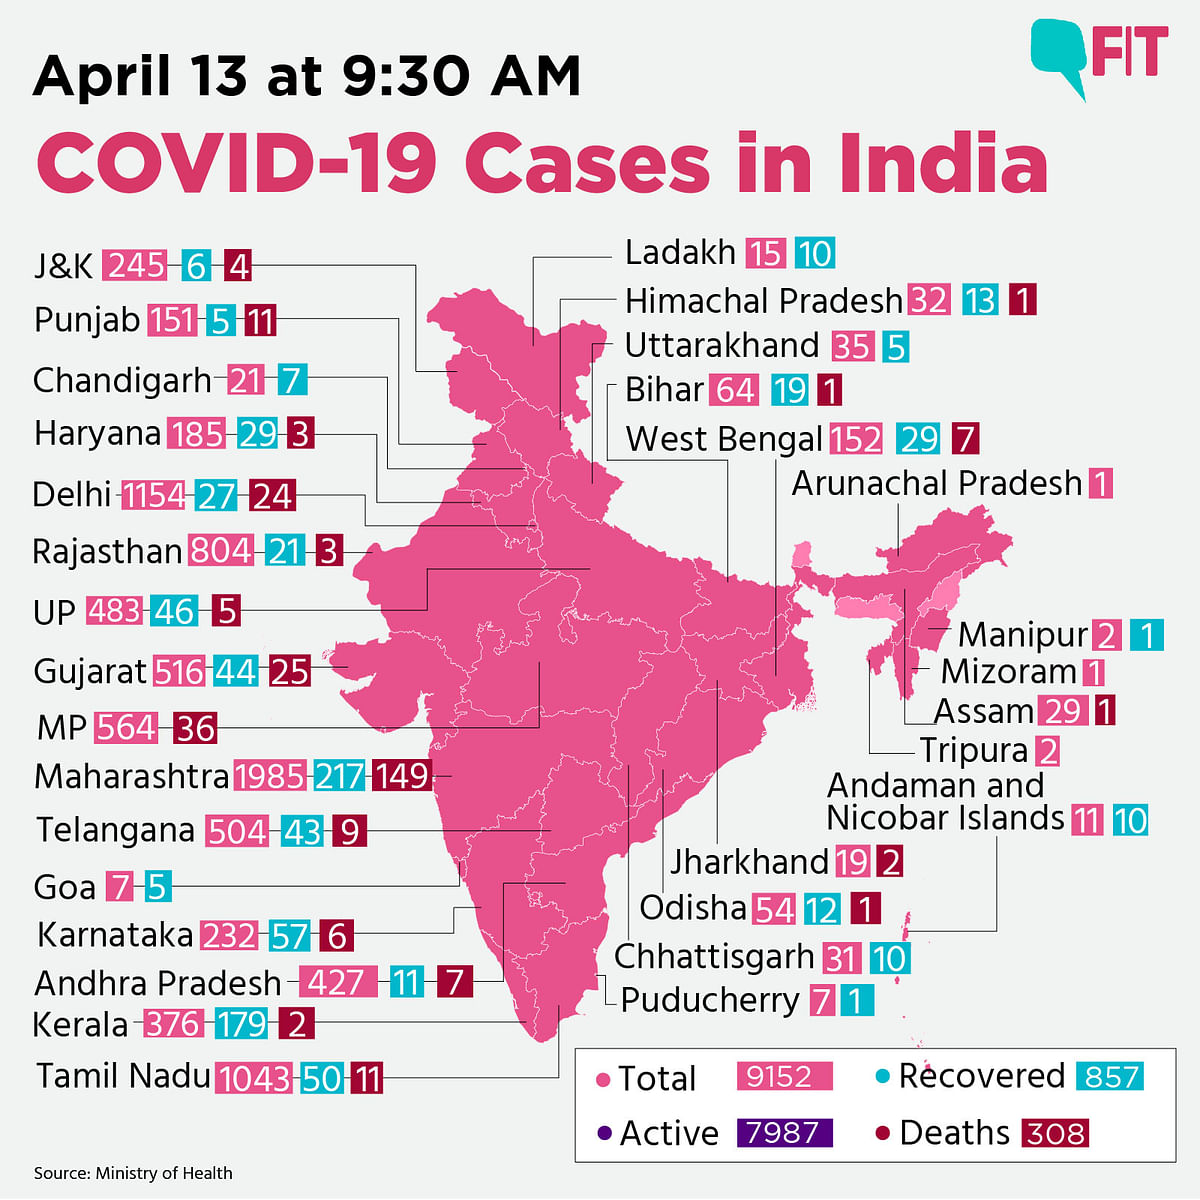 COVID-19 India: Positive Cases Cross 9,000 Mark, Death Toll at 308